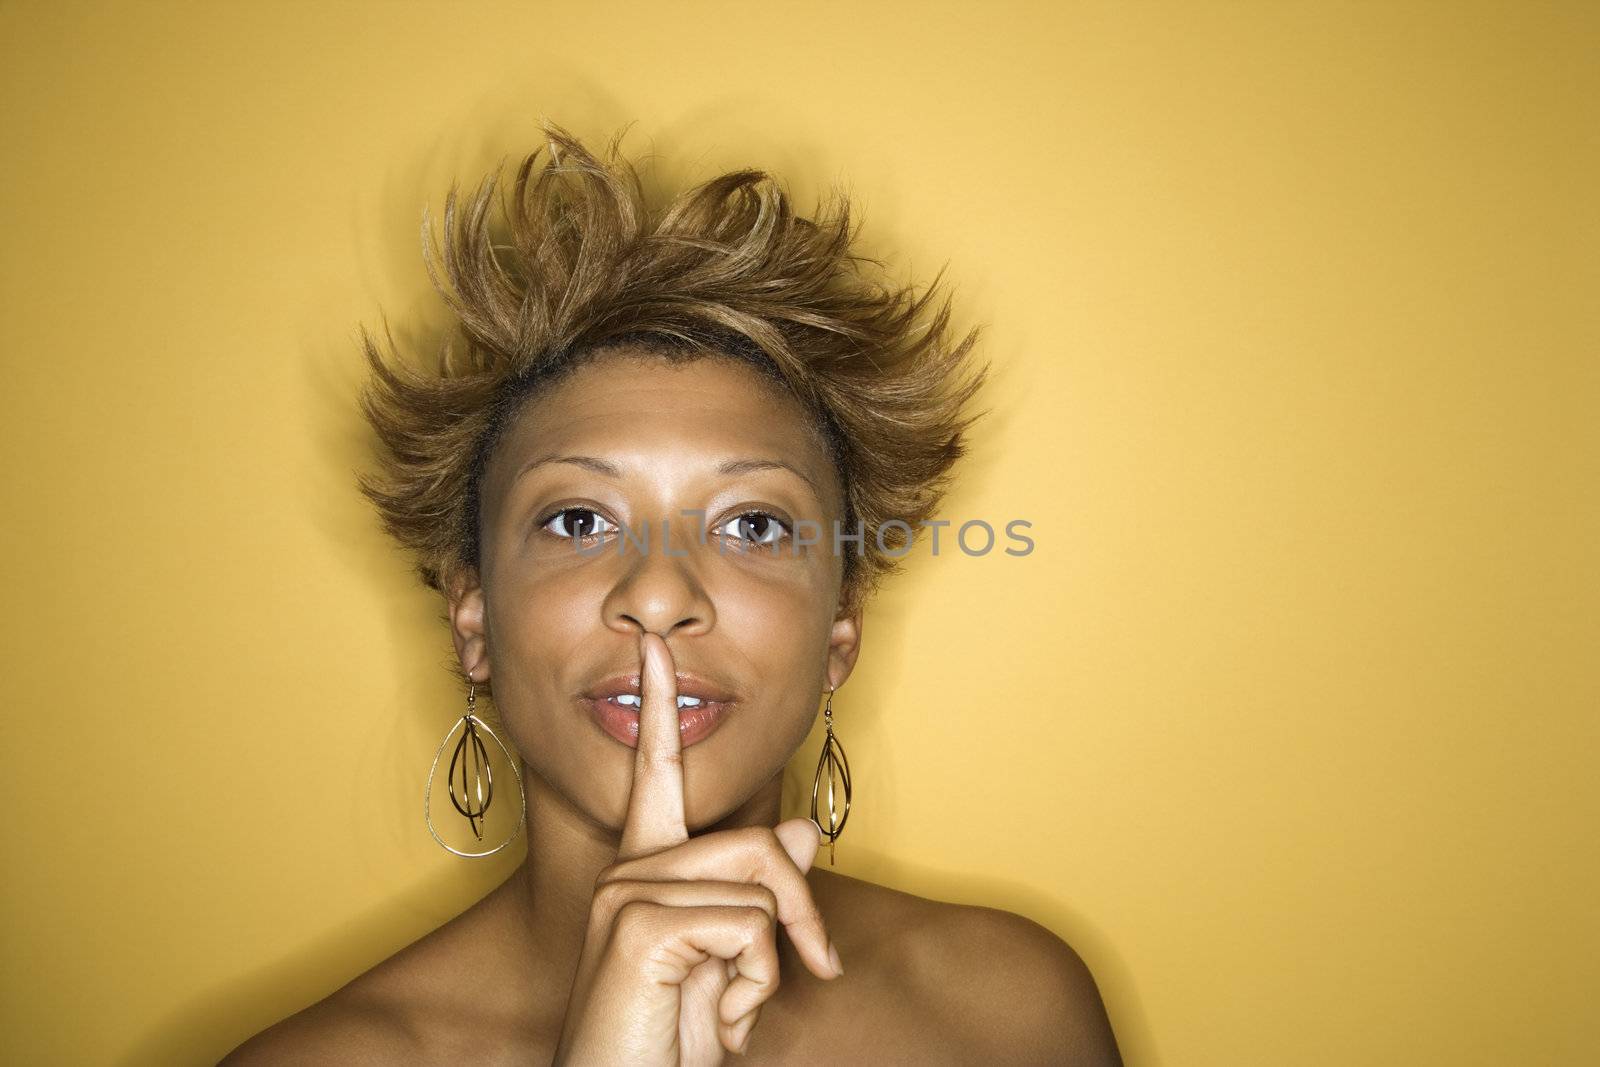 Portrait of young African-American adult woman on yellow background quieting the viewer.